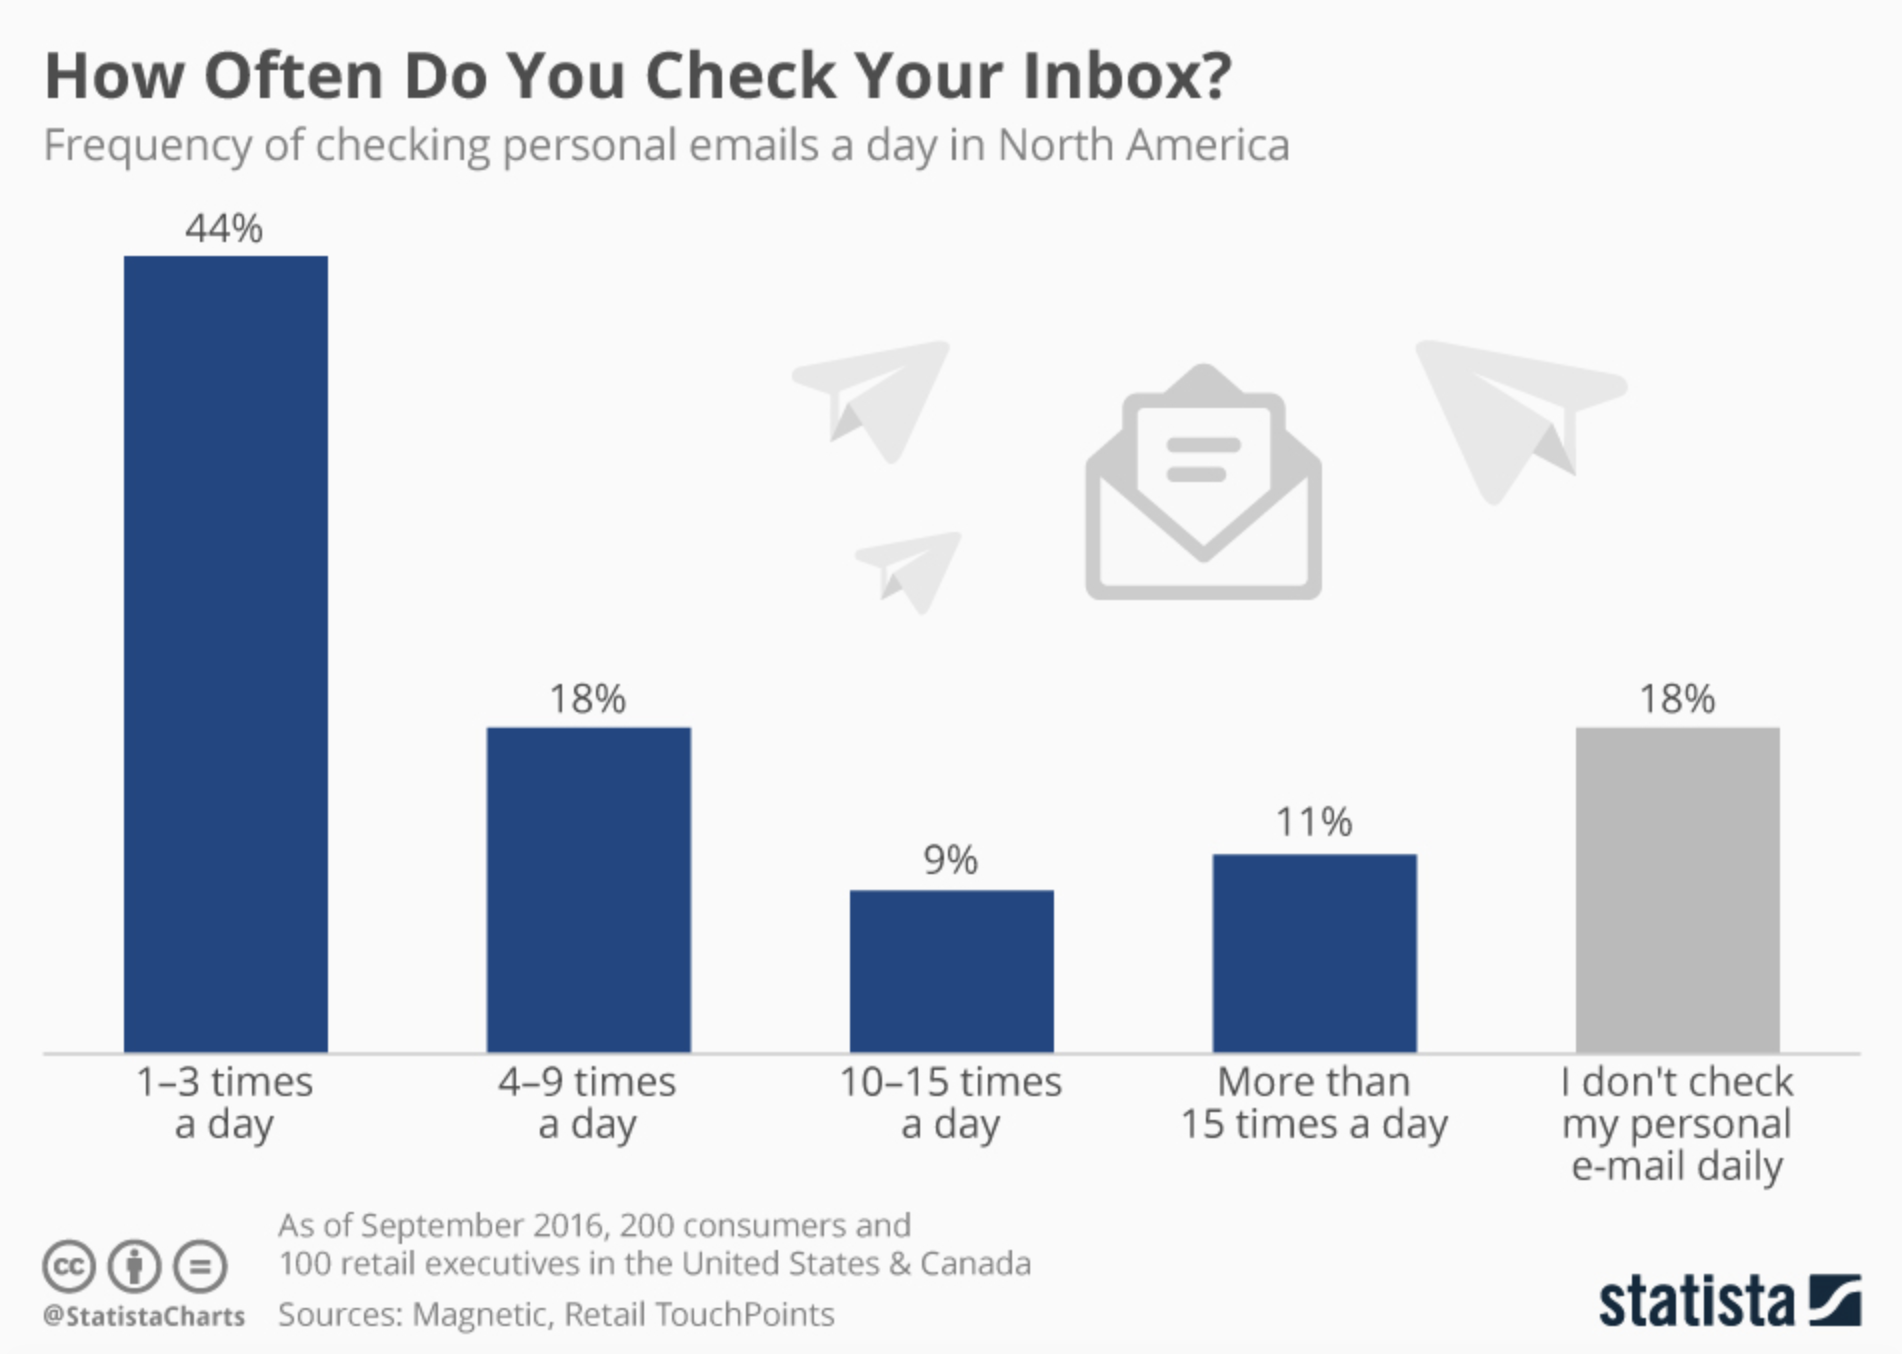 Frequency of checking personal email stats